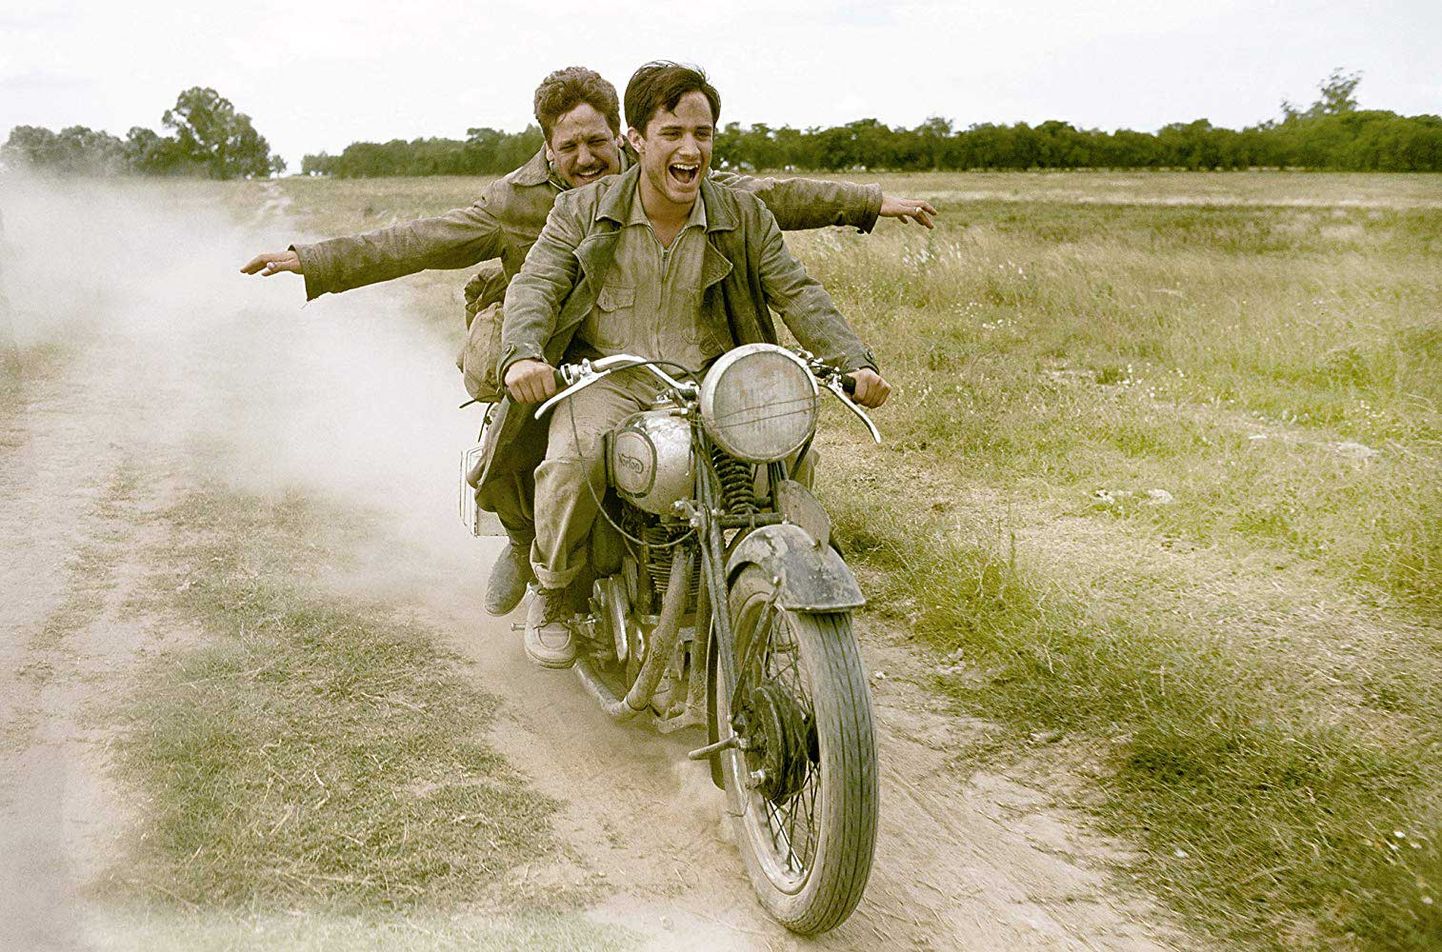 "The Motorcycle Diaries"